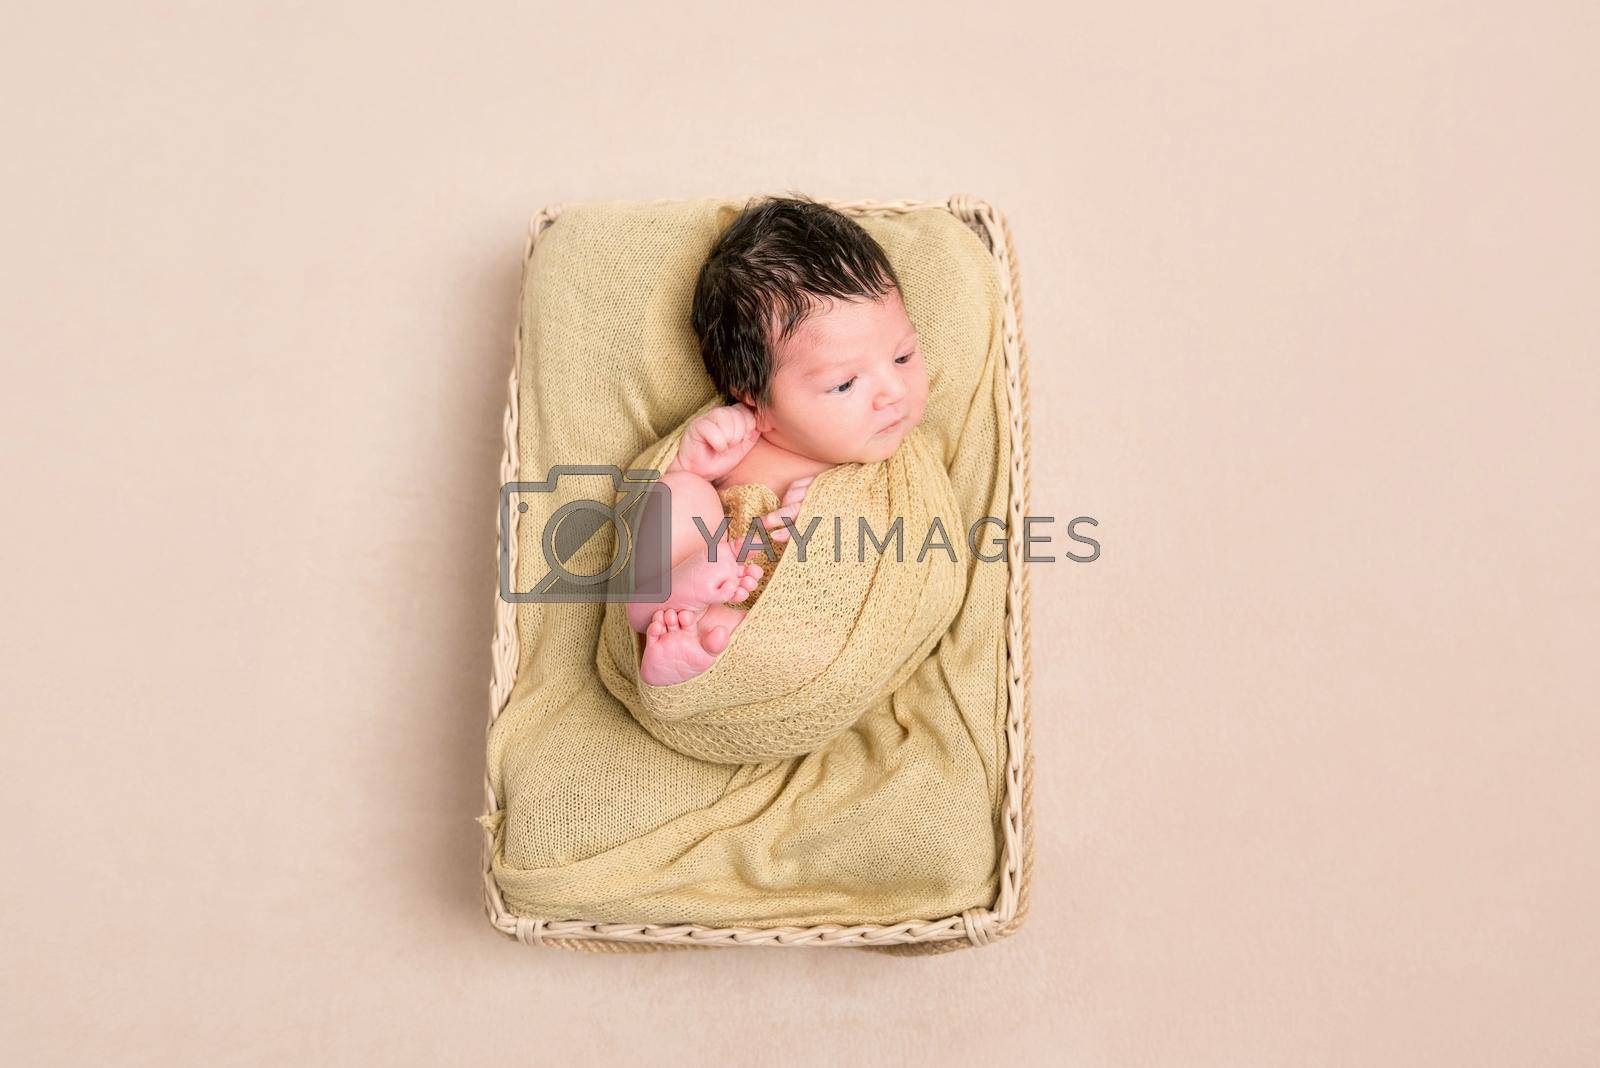 Royalty free image of Wrapped black-haired baby basket, topview by tan4ikk1